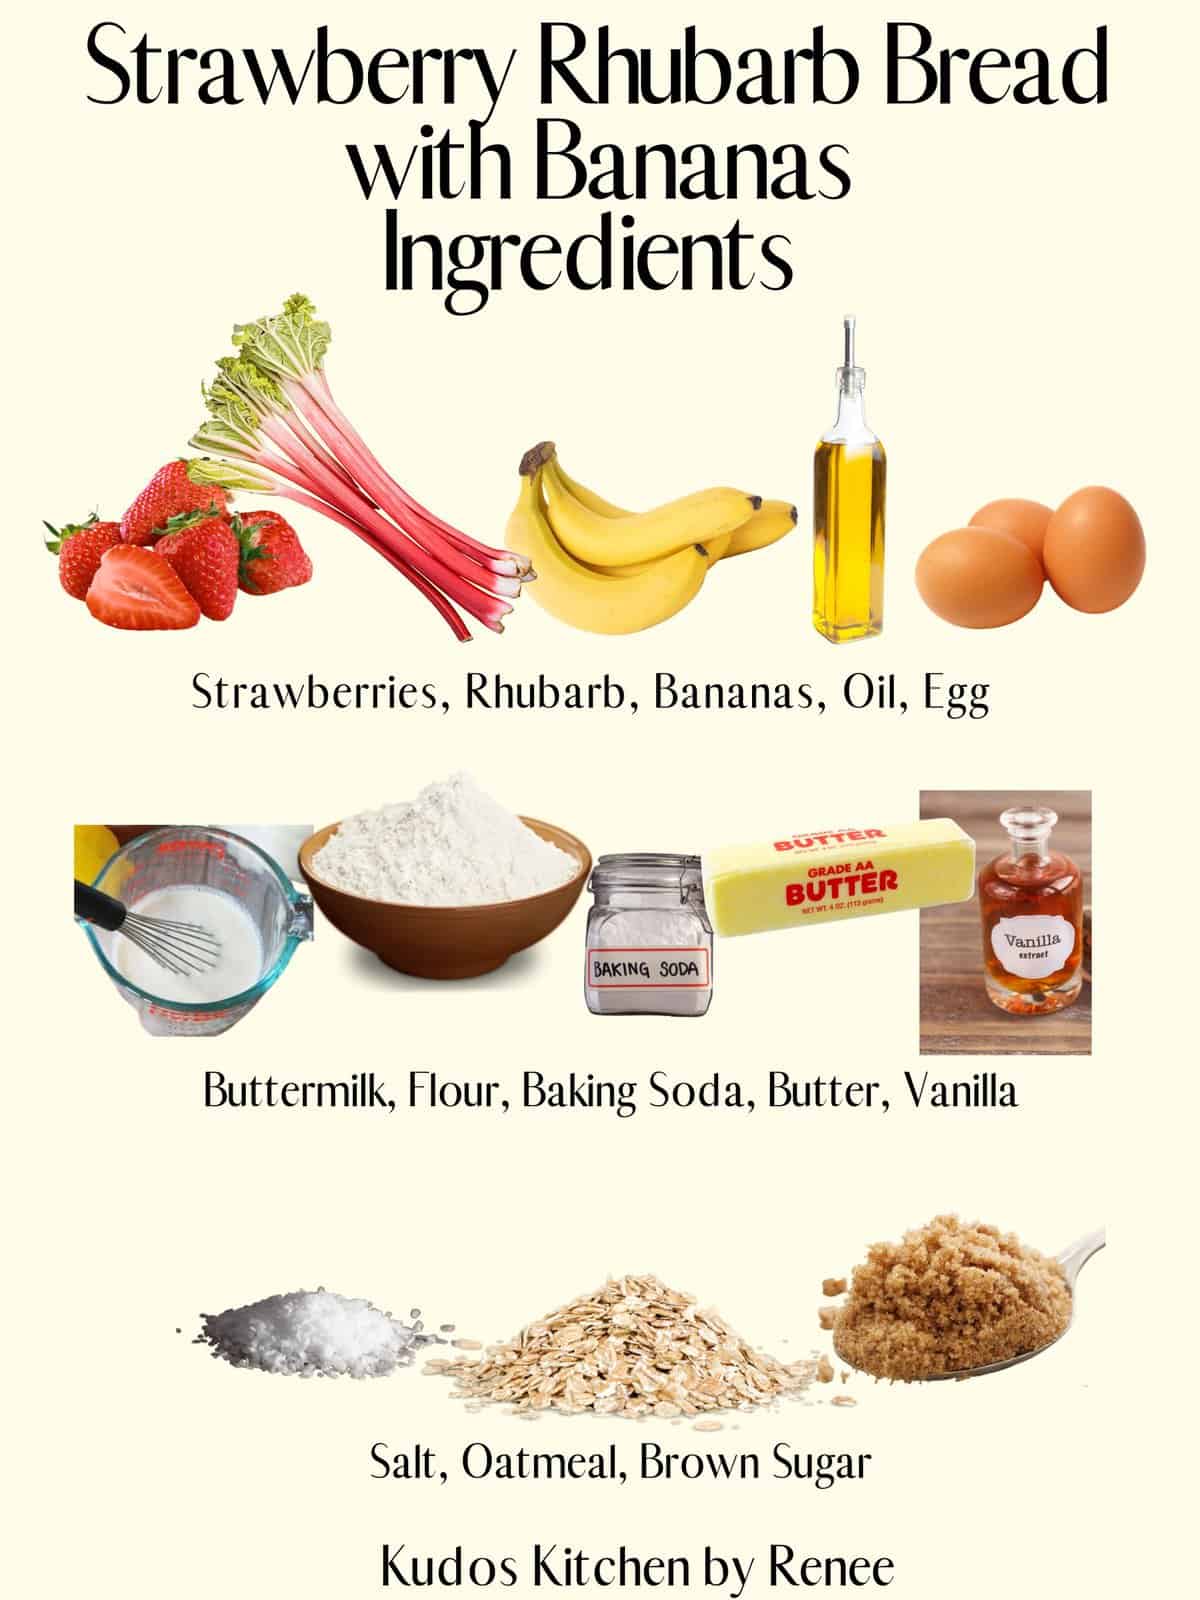 A visual ingredient collage of what is needed to make Strawberry Rhubarb Bread with Bananas. 